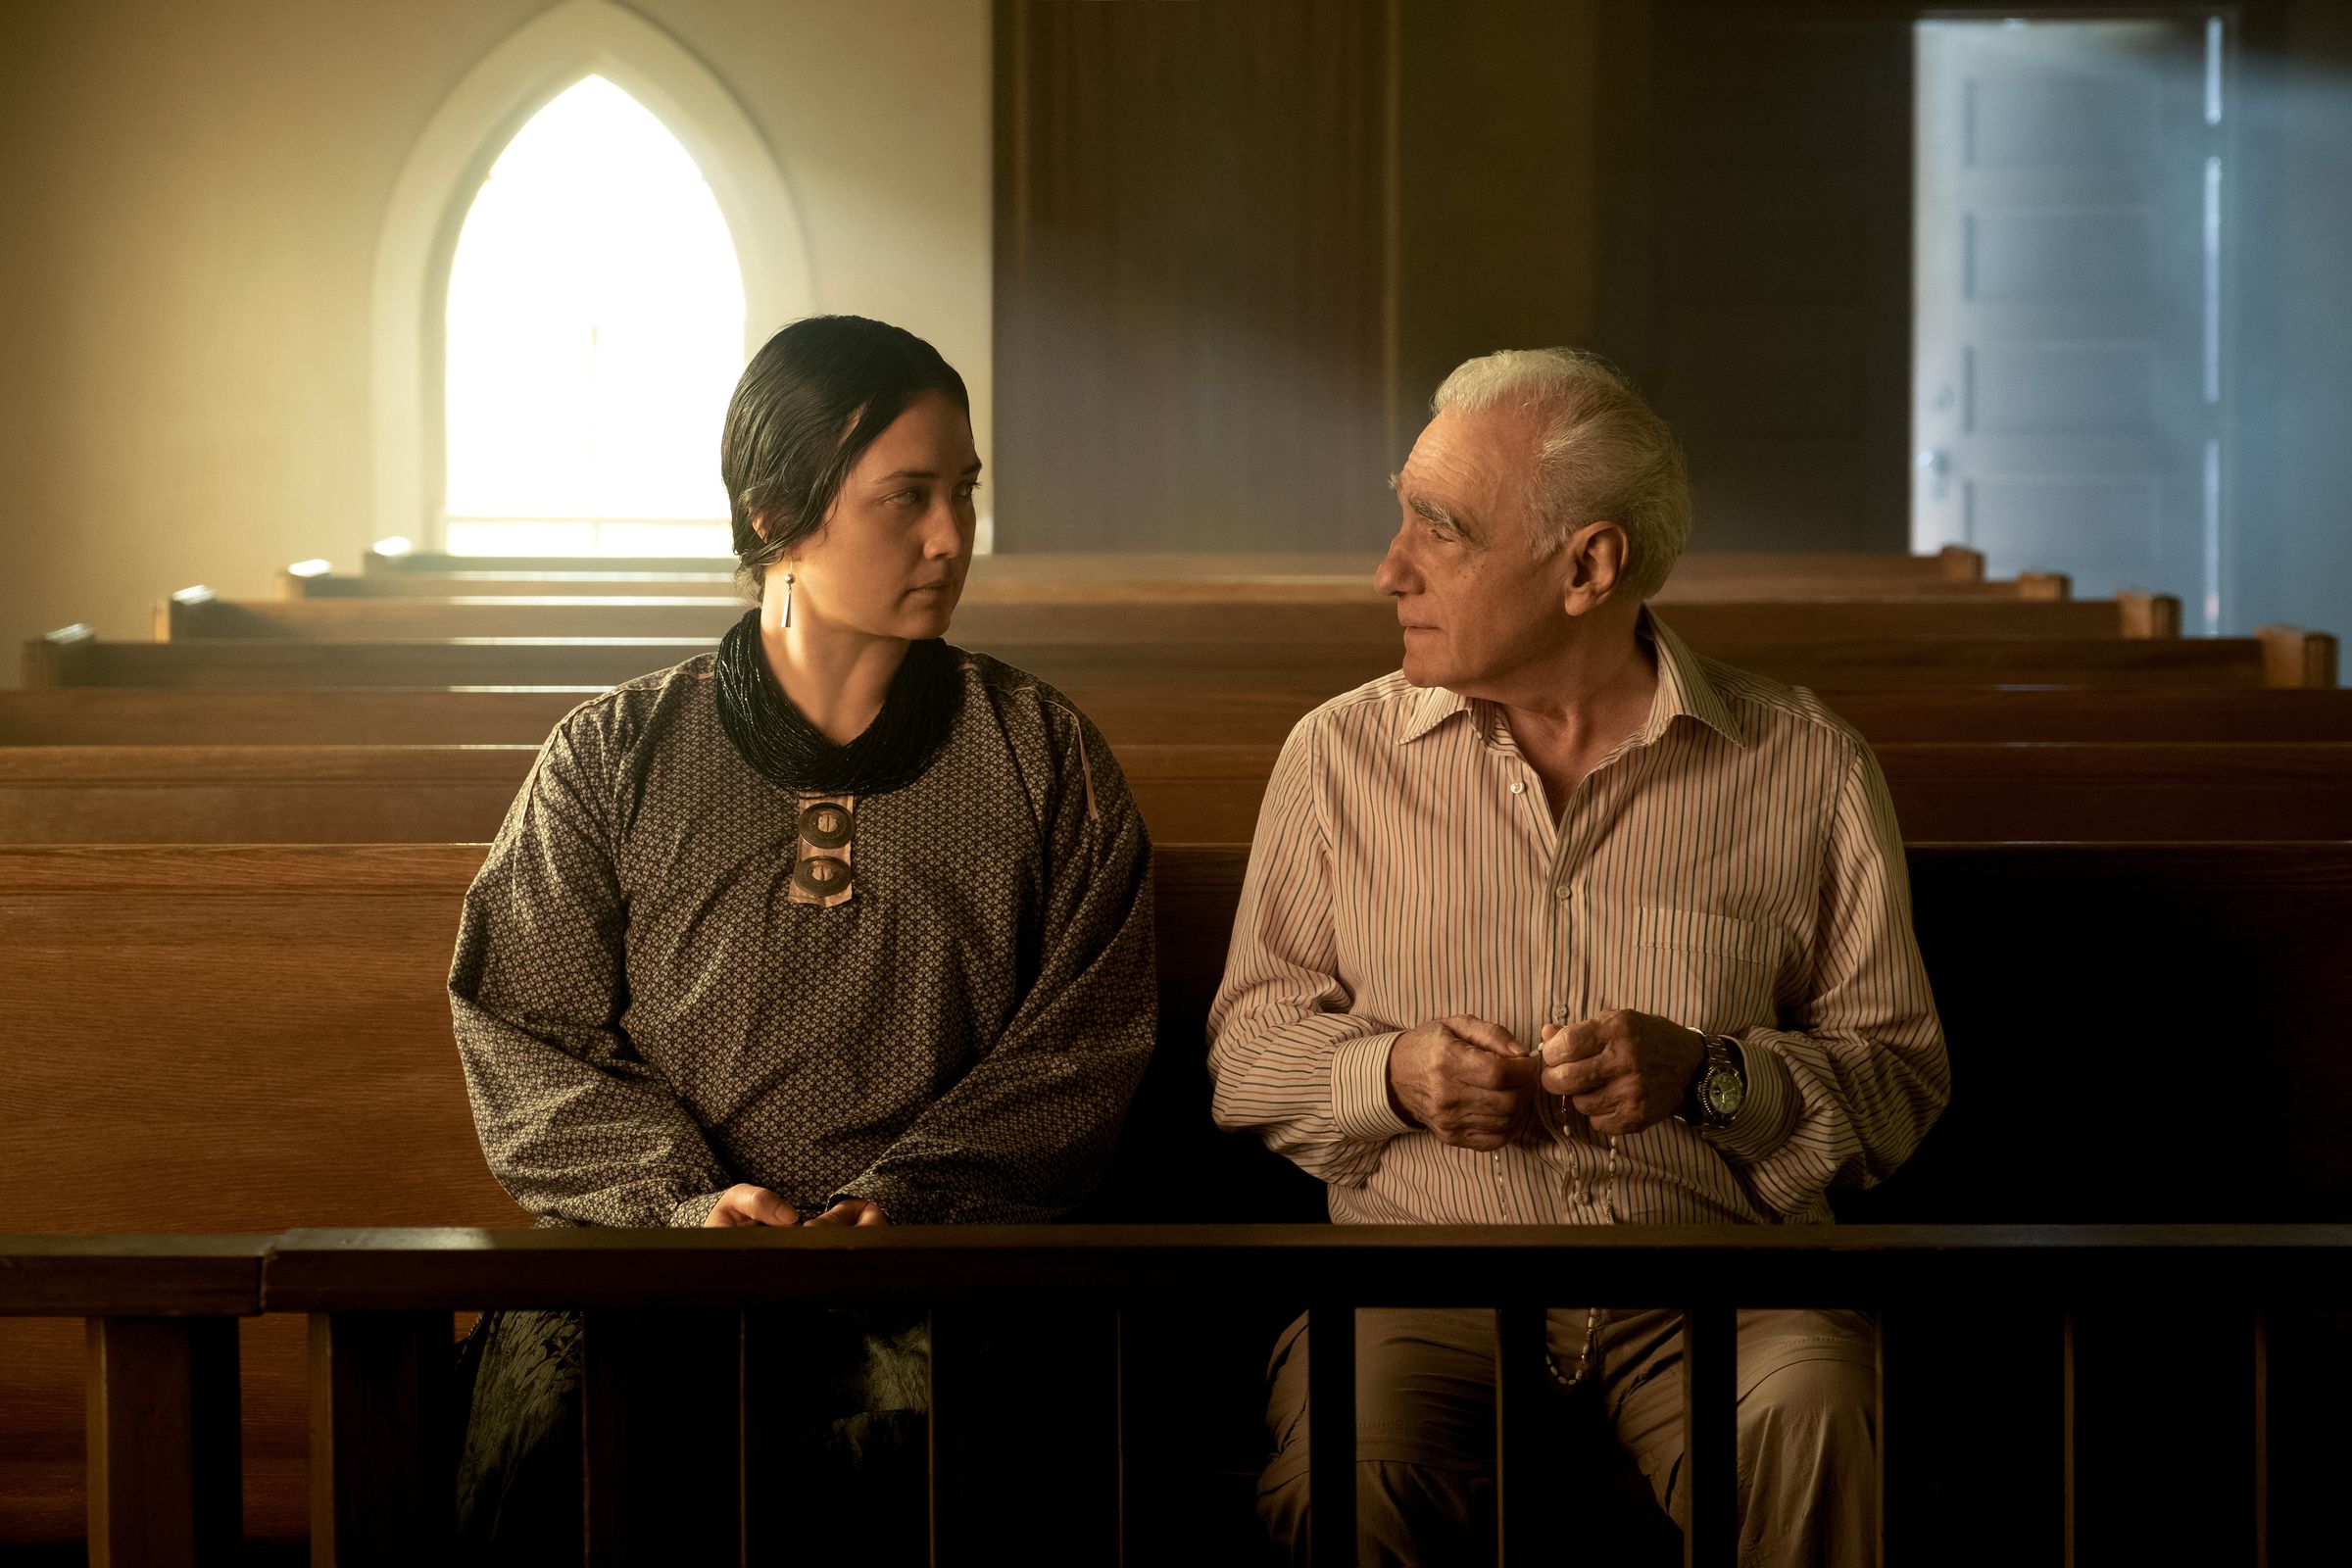 A woman in a gray dress and a man in a white shirt and slacks sitting together in the front of an empty church.